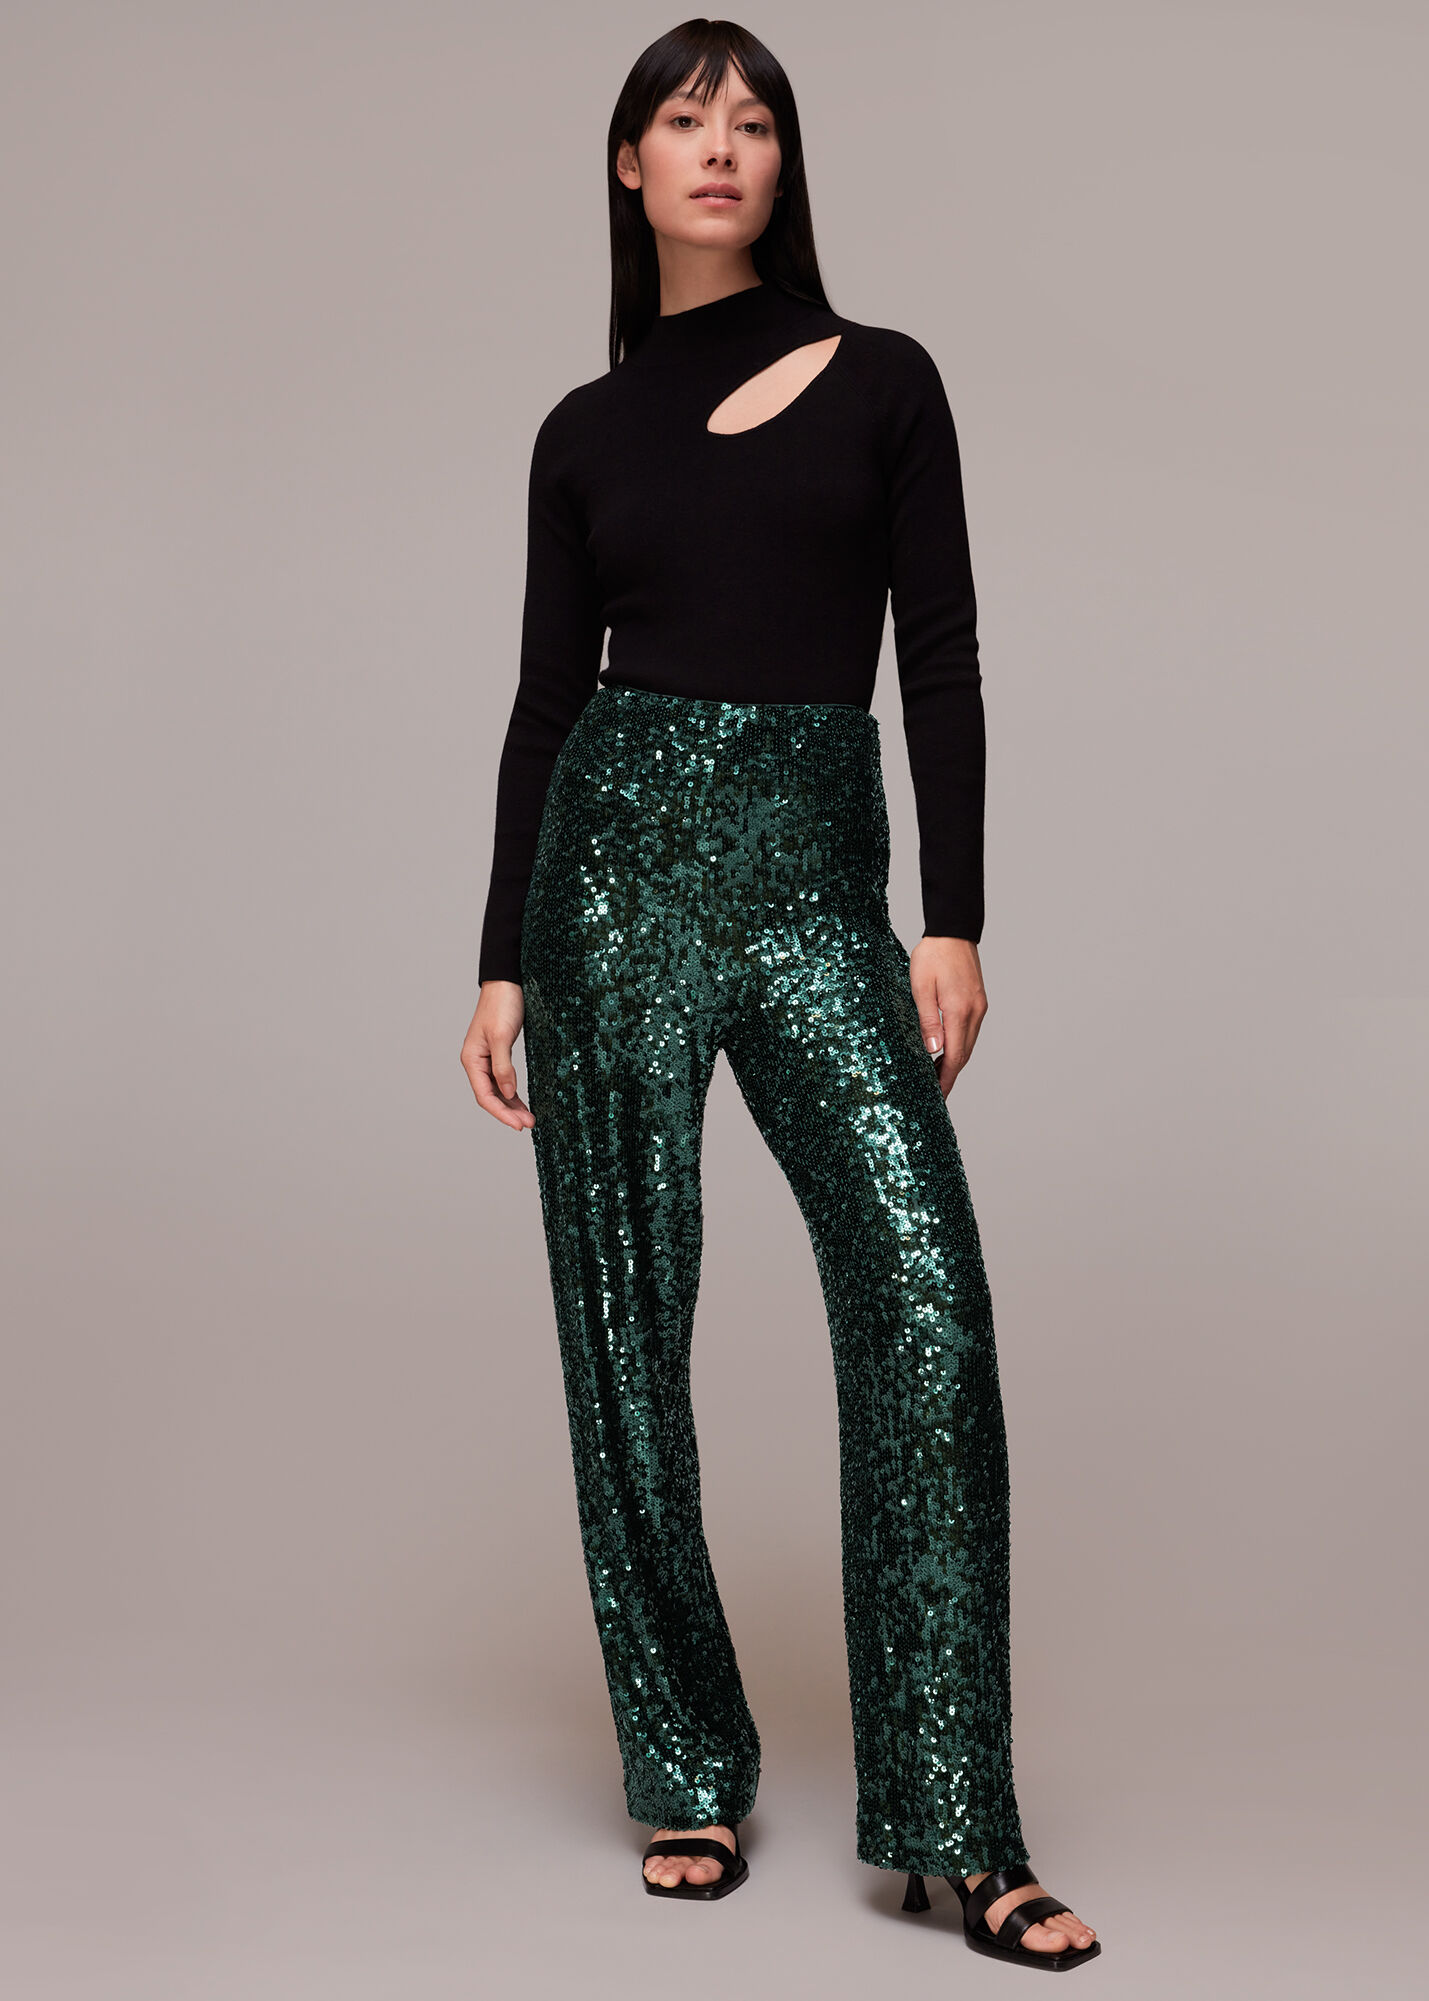 KAZO Trousers and Pants  Buy KAZO MultiColor Sequin Flared Pant Online   Nykaa Fashion